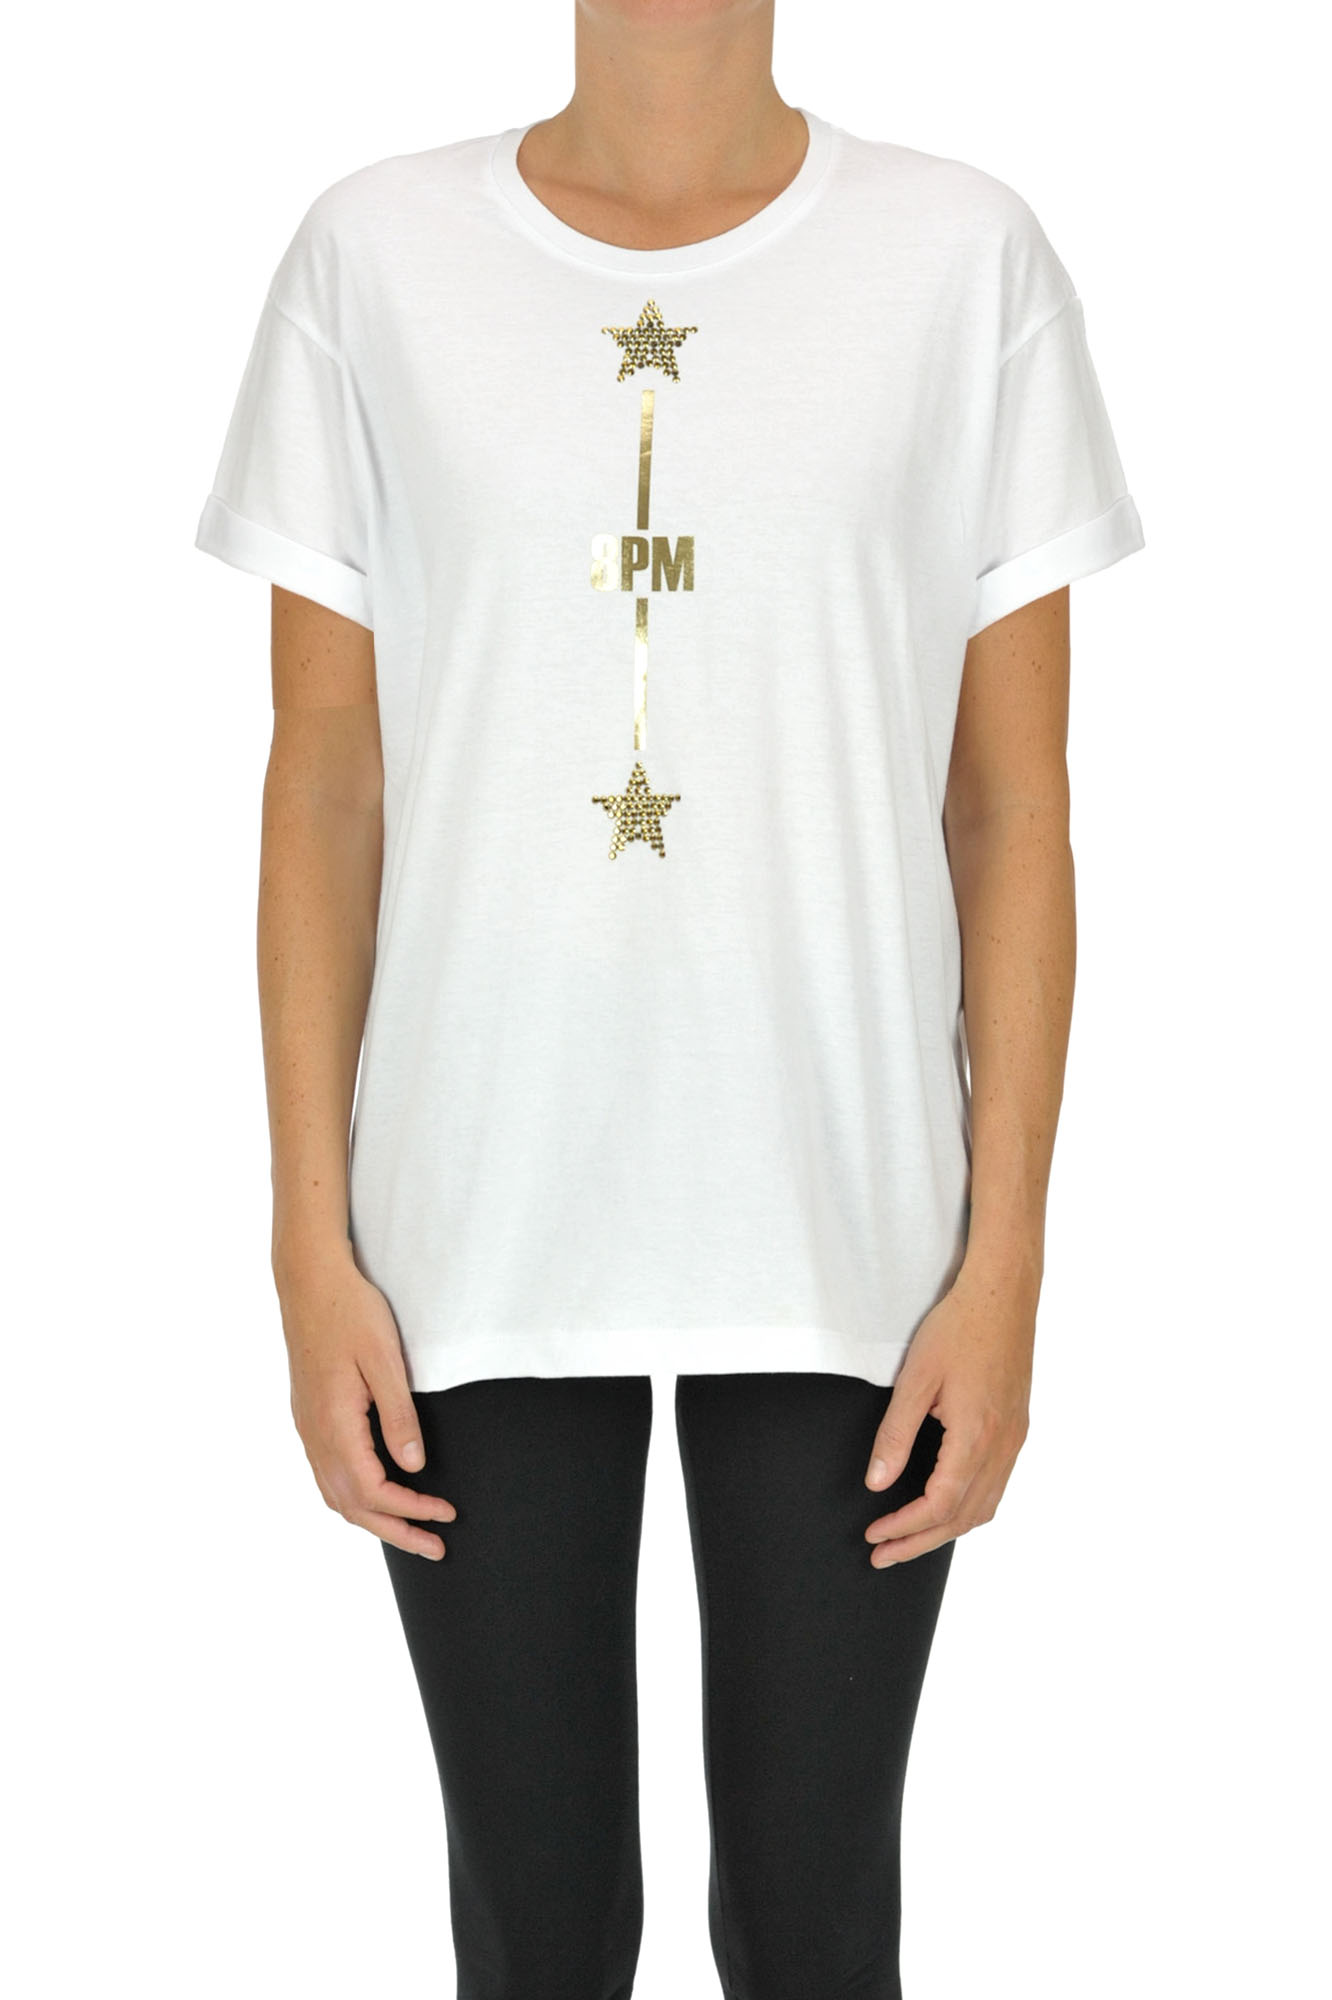 8pm Embellished T-shirt In White